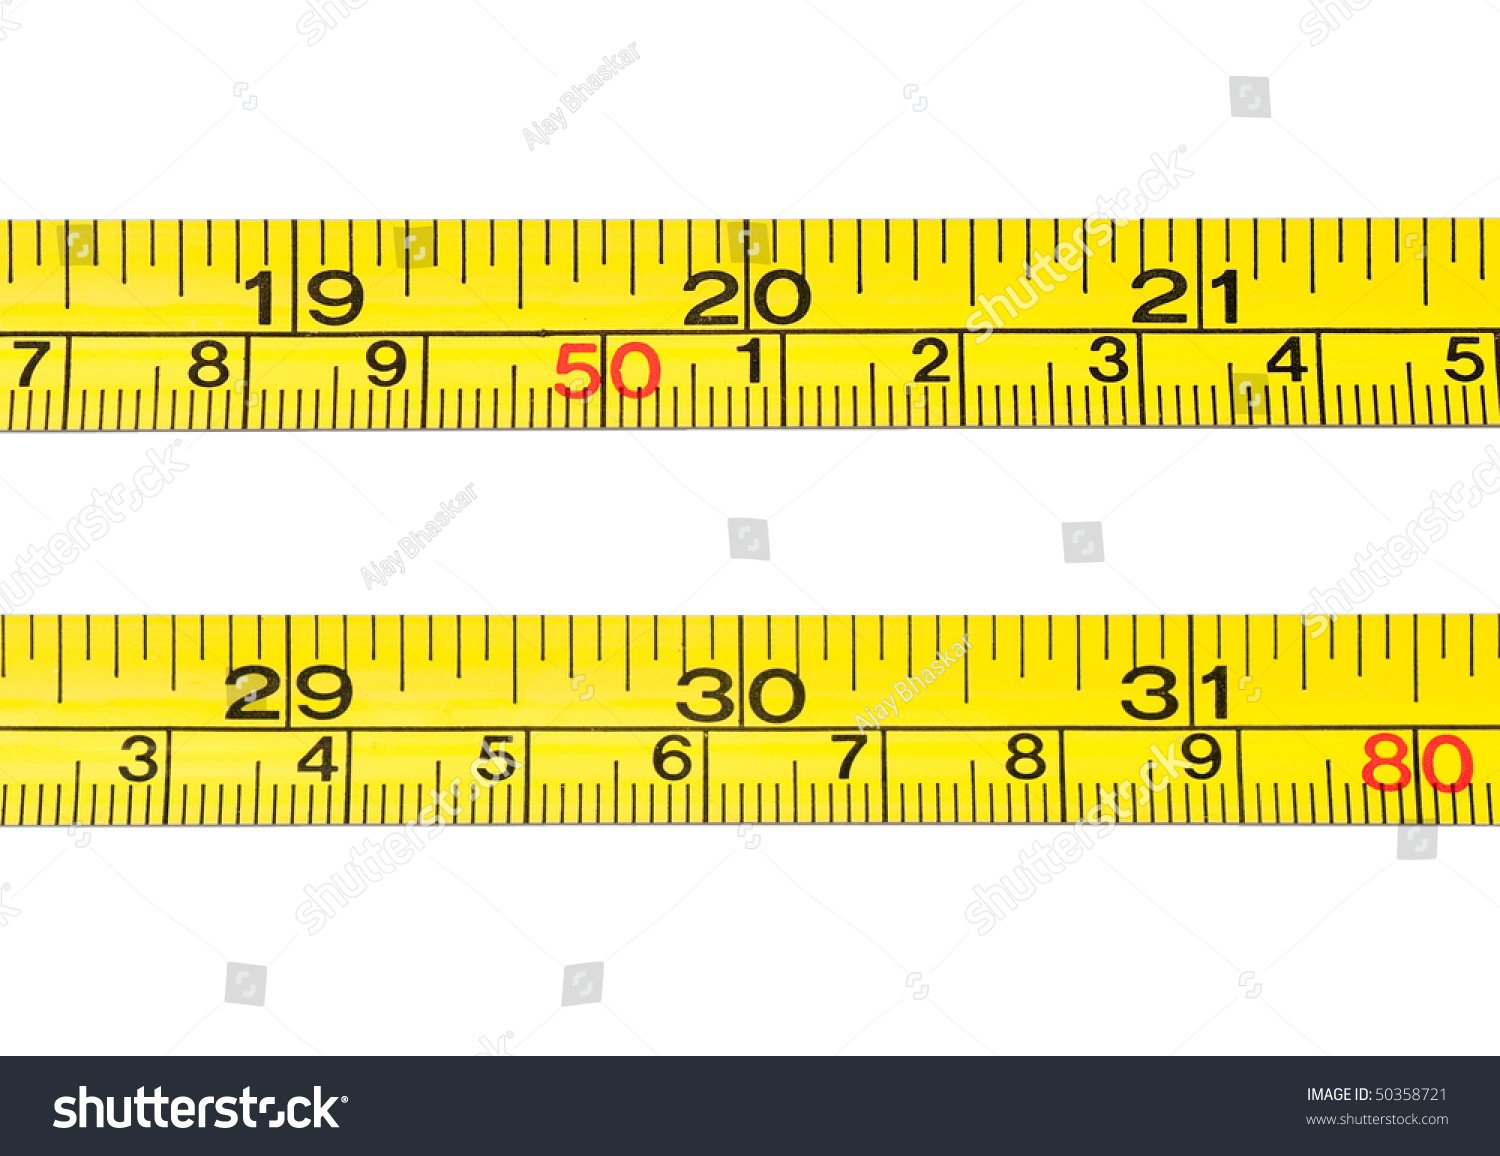 Teach How To Read A Tape Measure For Reading A Tape Measure Worksheet